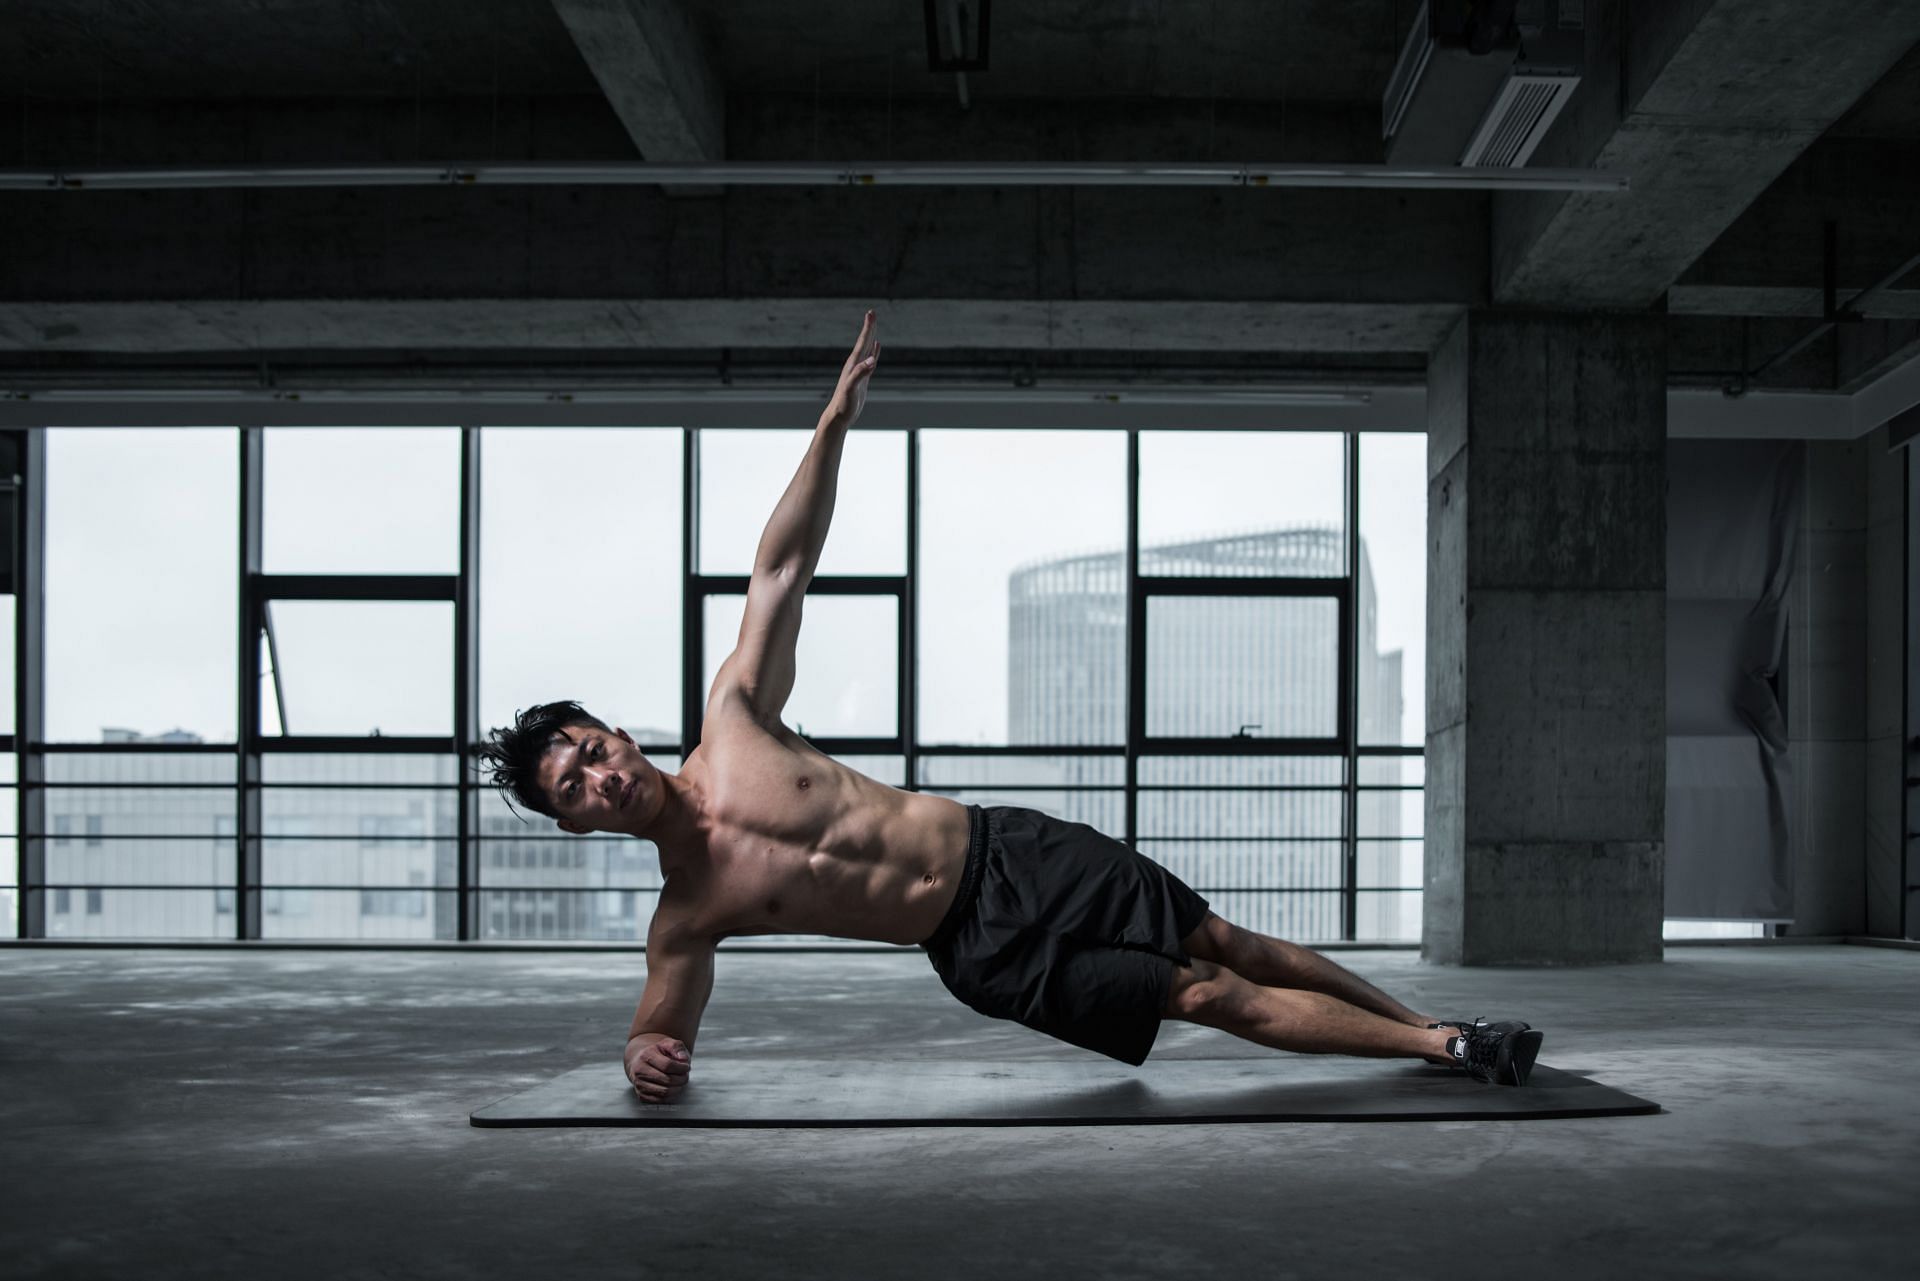 Stunning Fitness Photography: Inspiring Poses & Styles